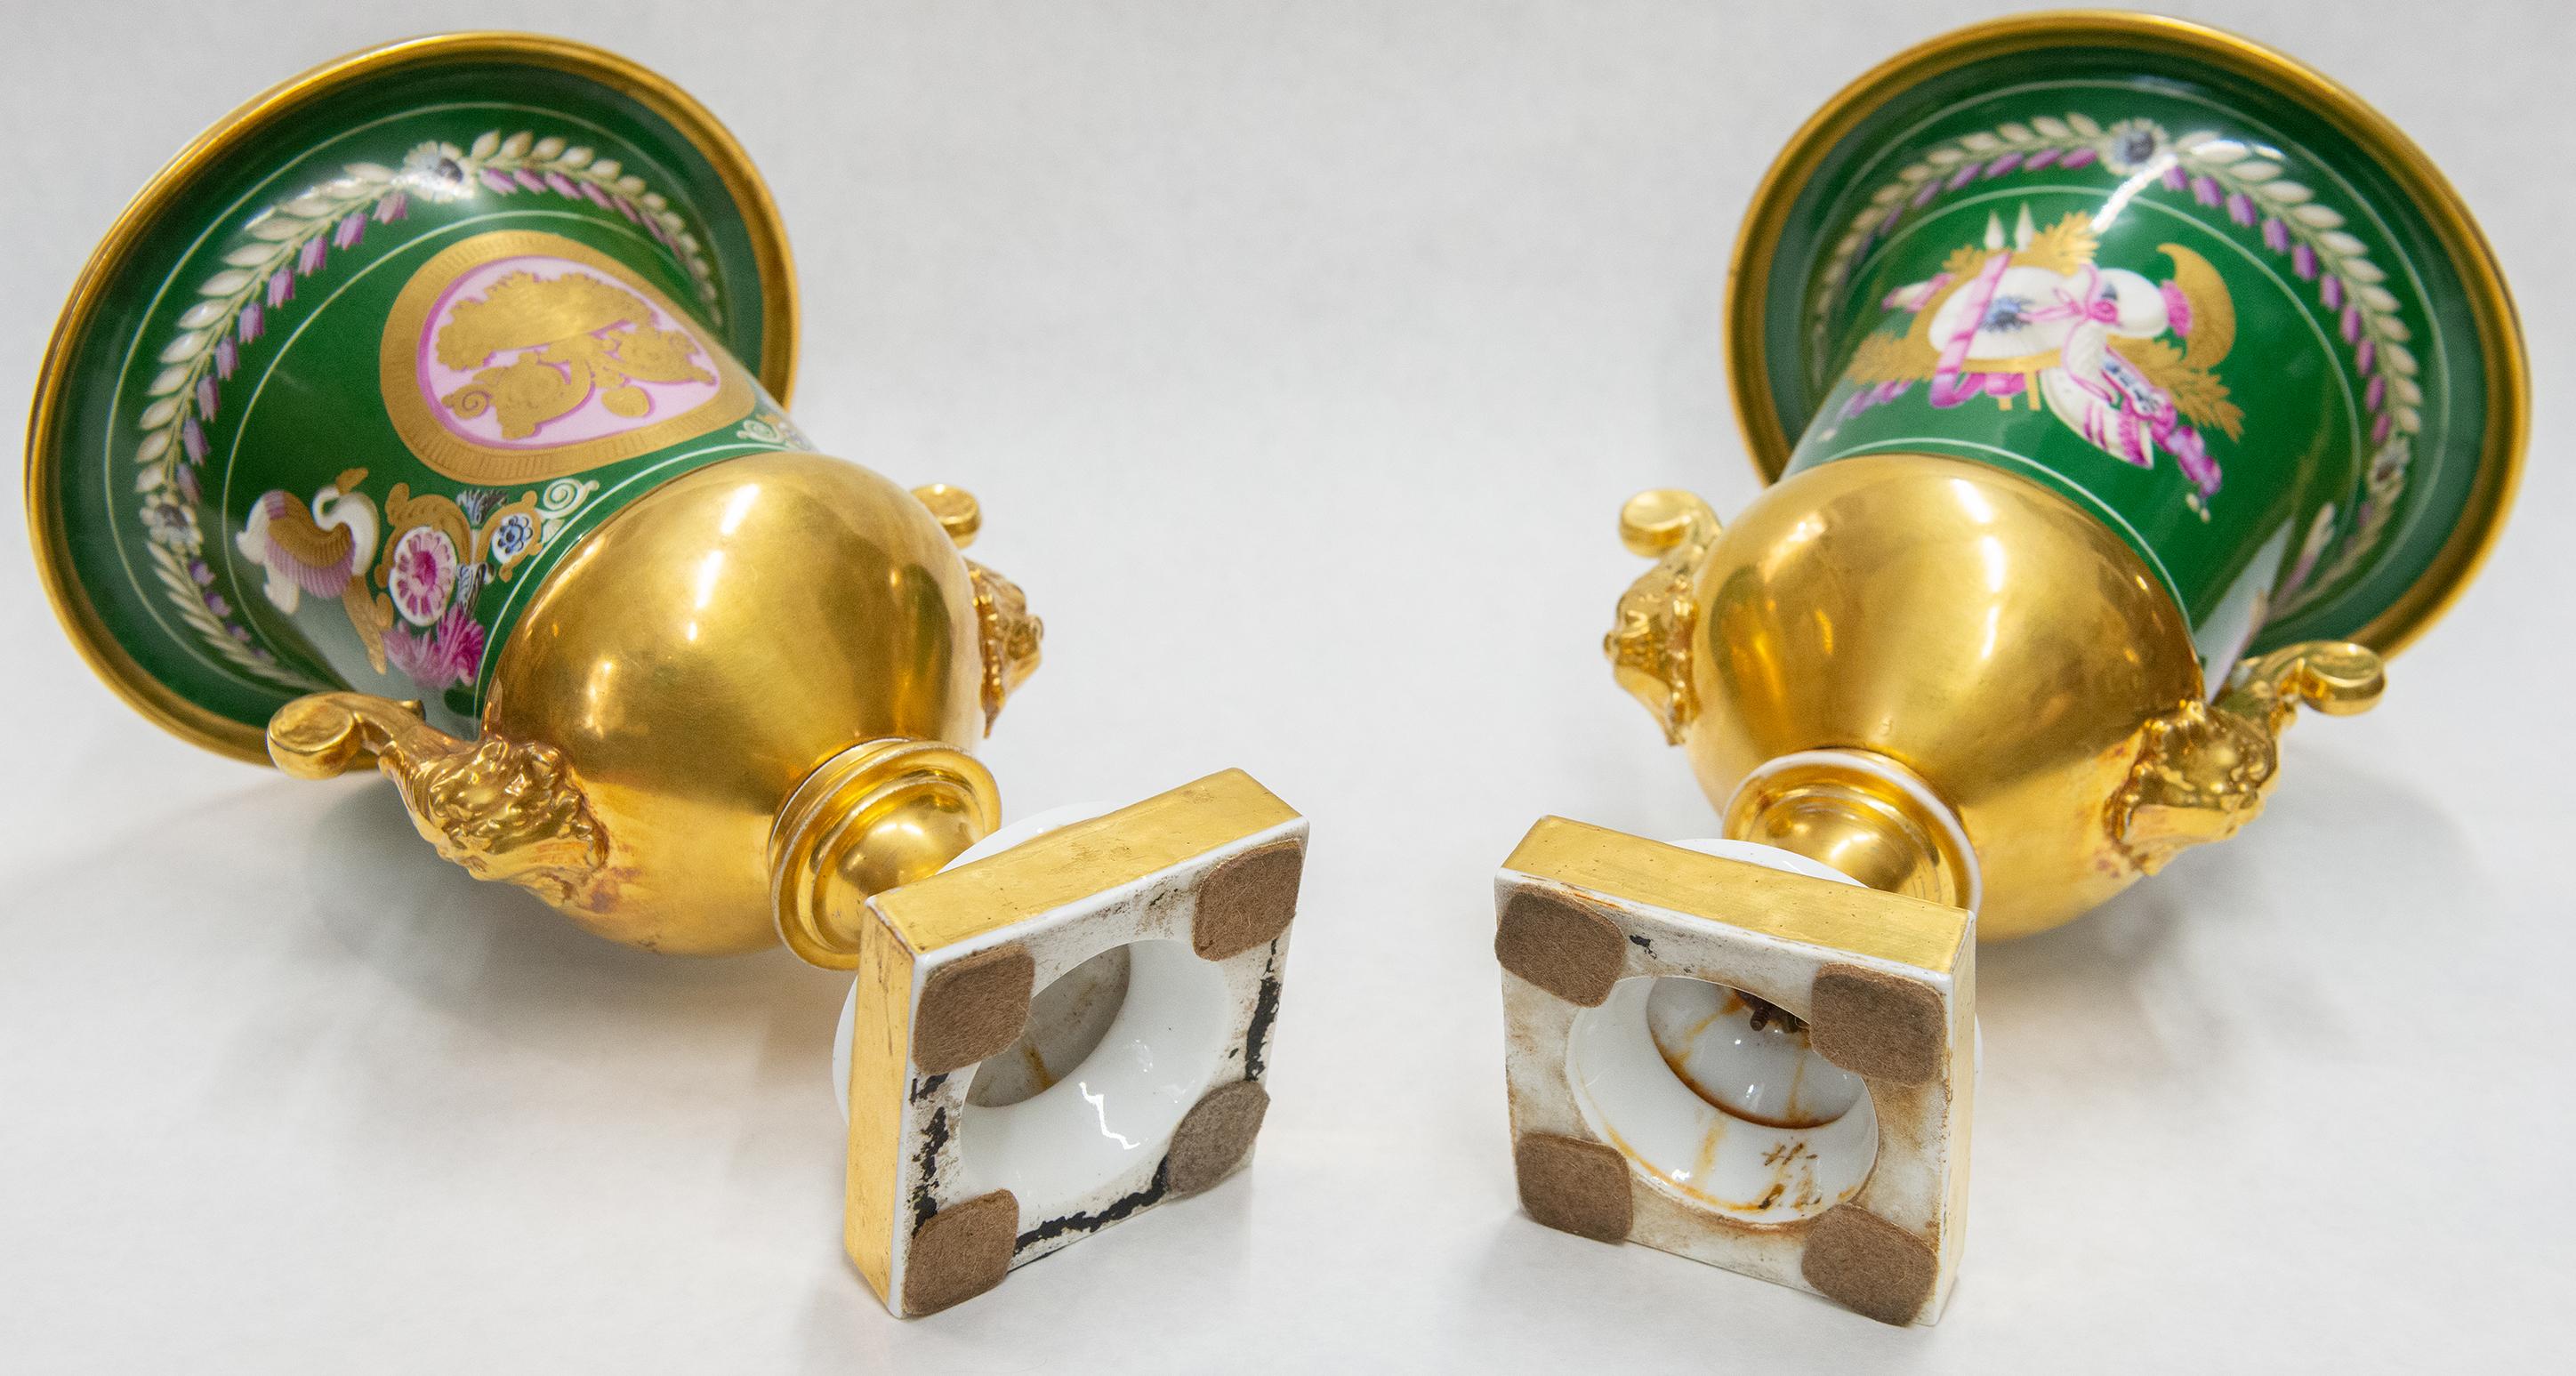 Rare Pair of Antique French Golden Porcelain Sèvres Vases  In Good Condition For Sale In Alessandria, Piemonte